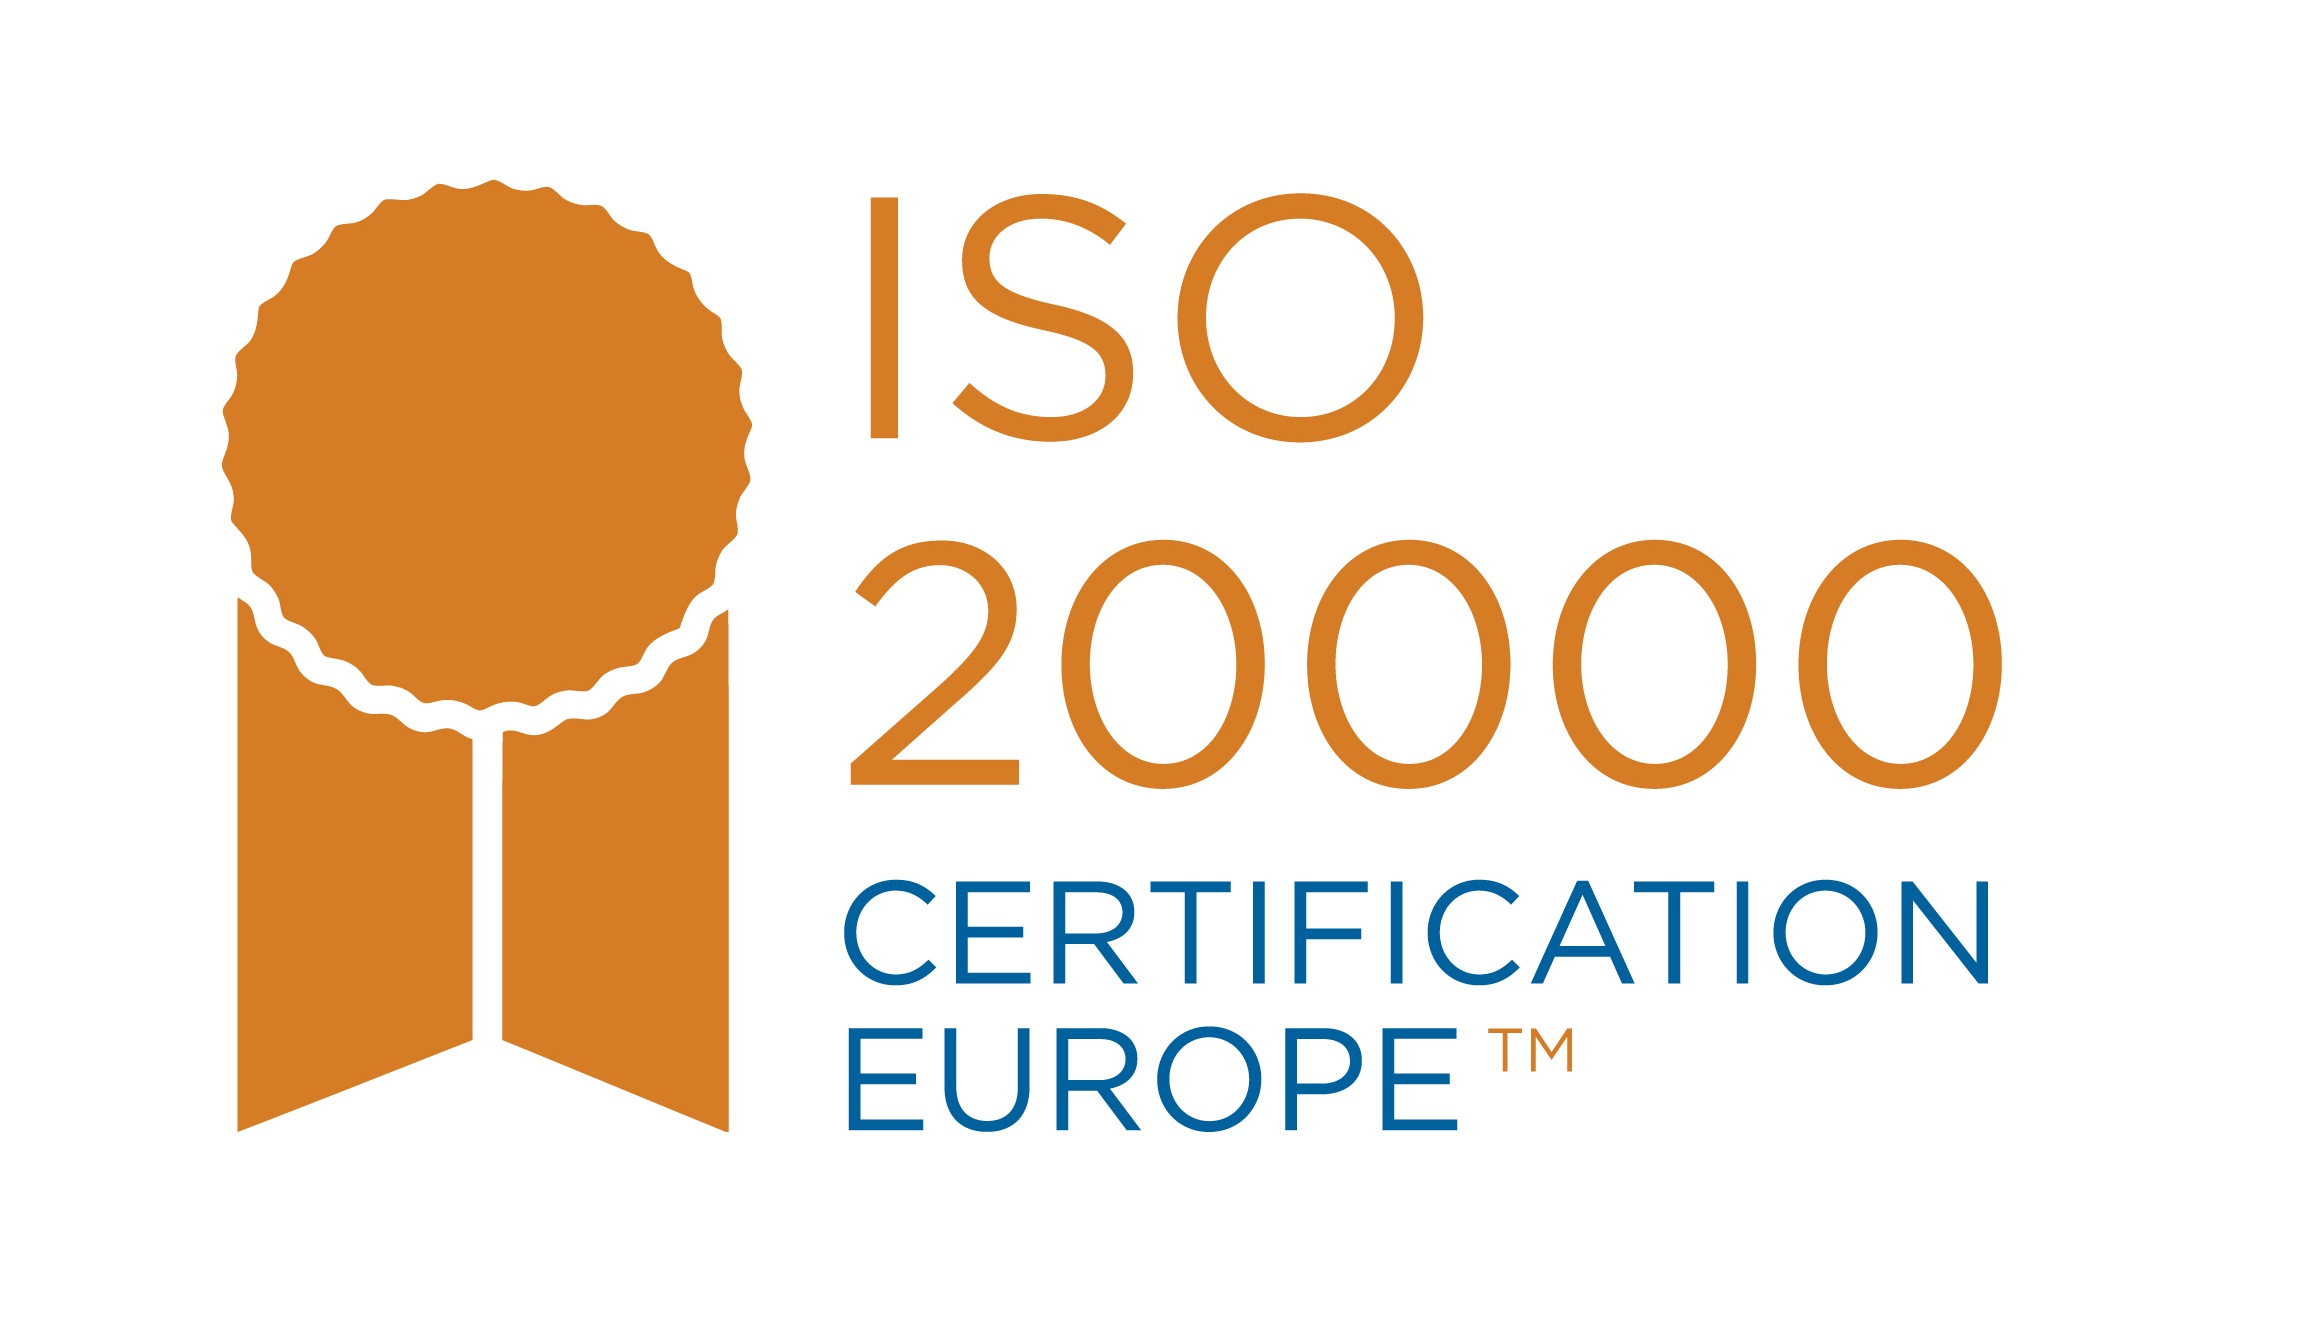 Nord Anglia Education receives ISO-20000 accreditation - Nord Anglia Education receives ISO-20000 accreditation